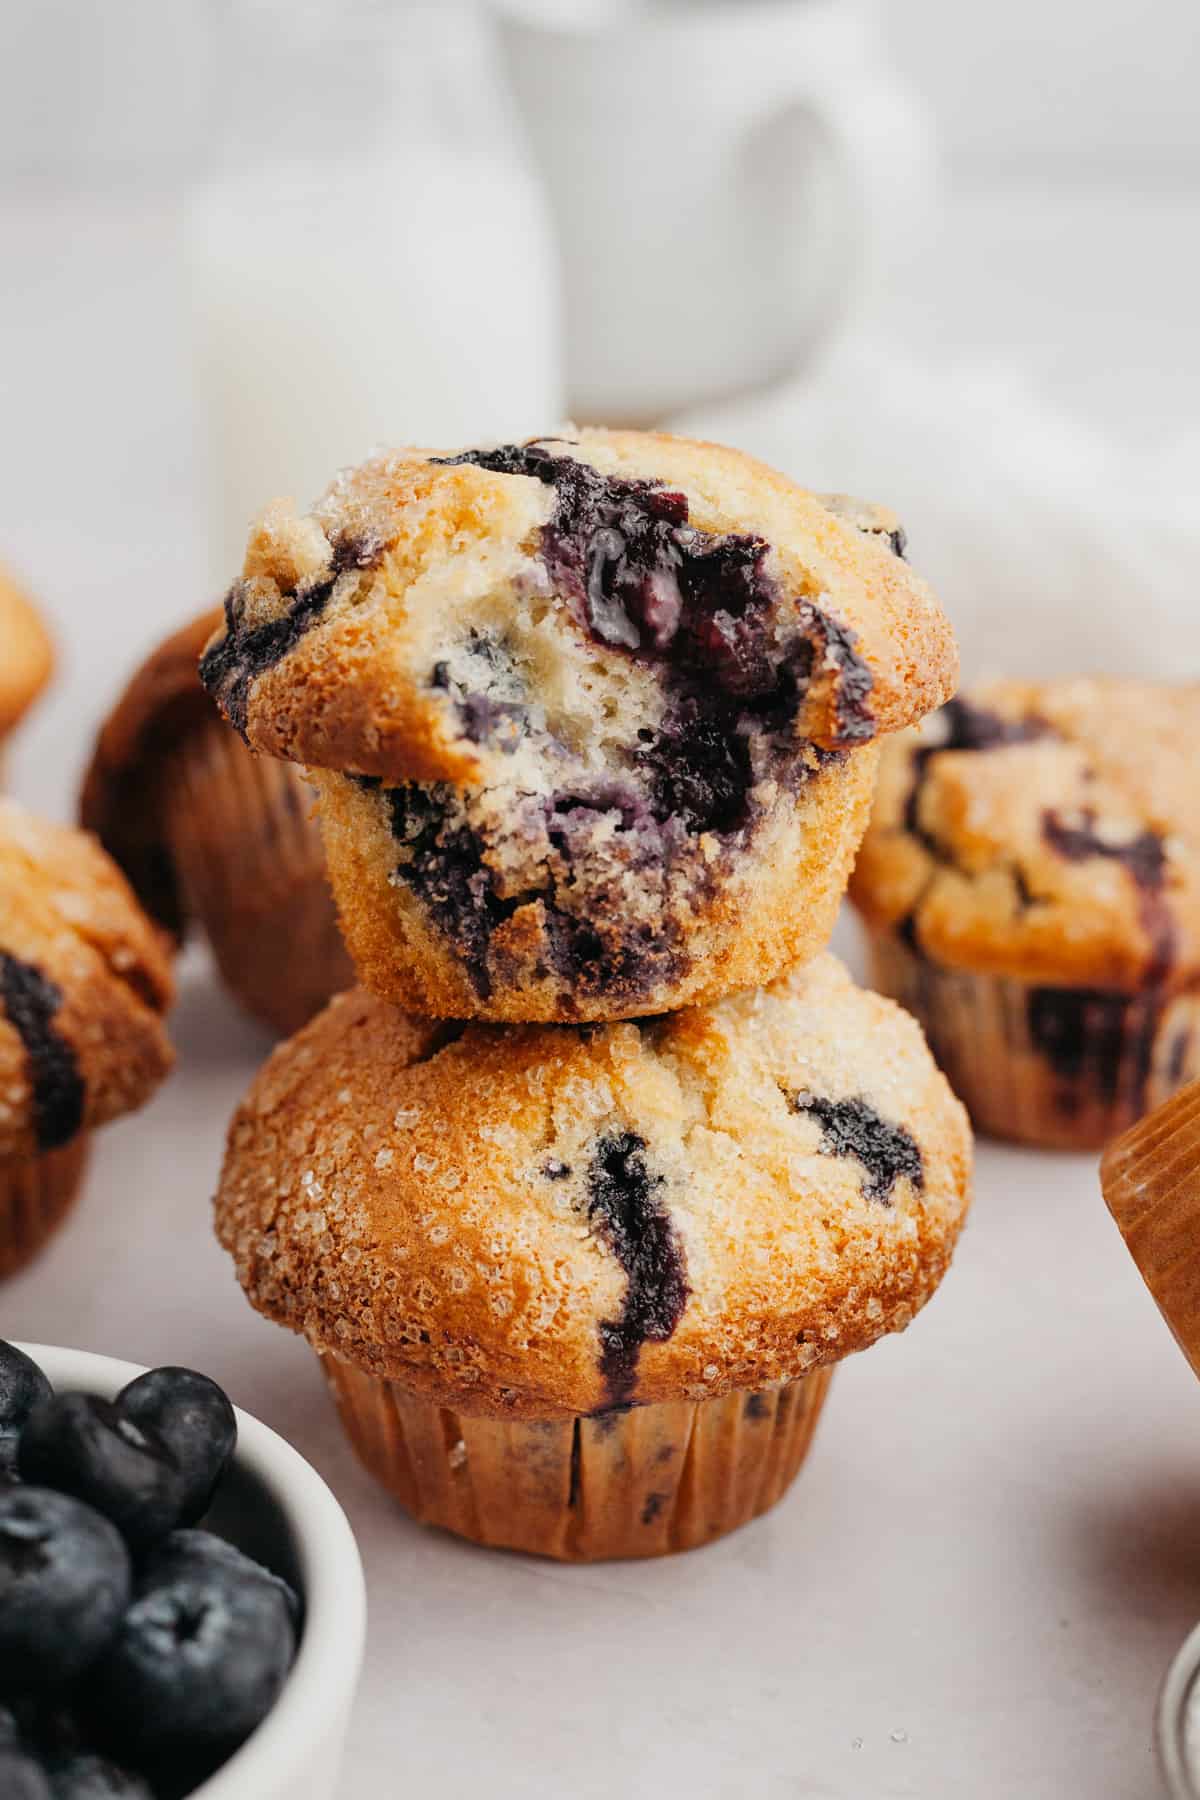 Two muffins stacked on top of each other, the muffin on top has a bite taken out of it.